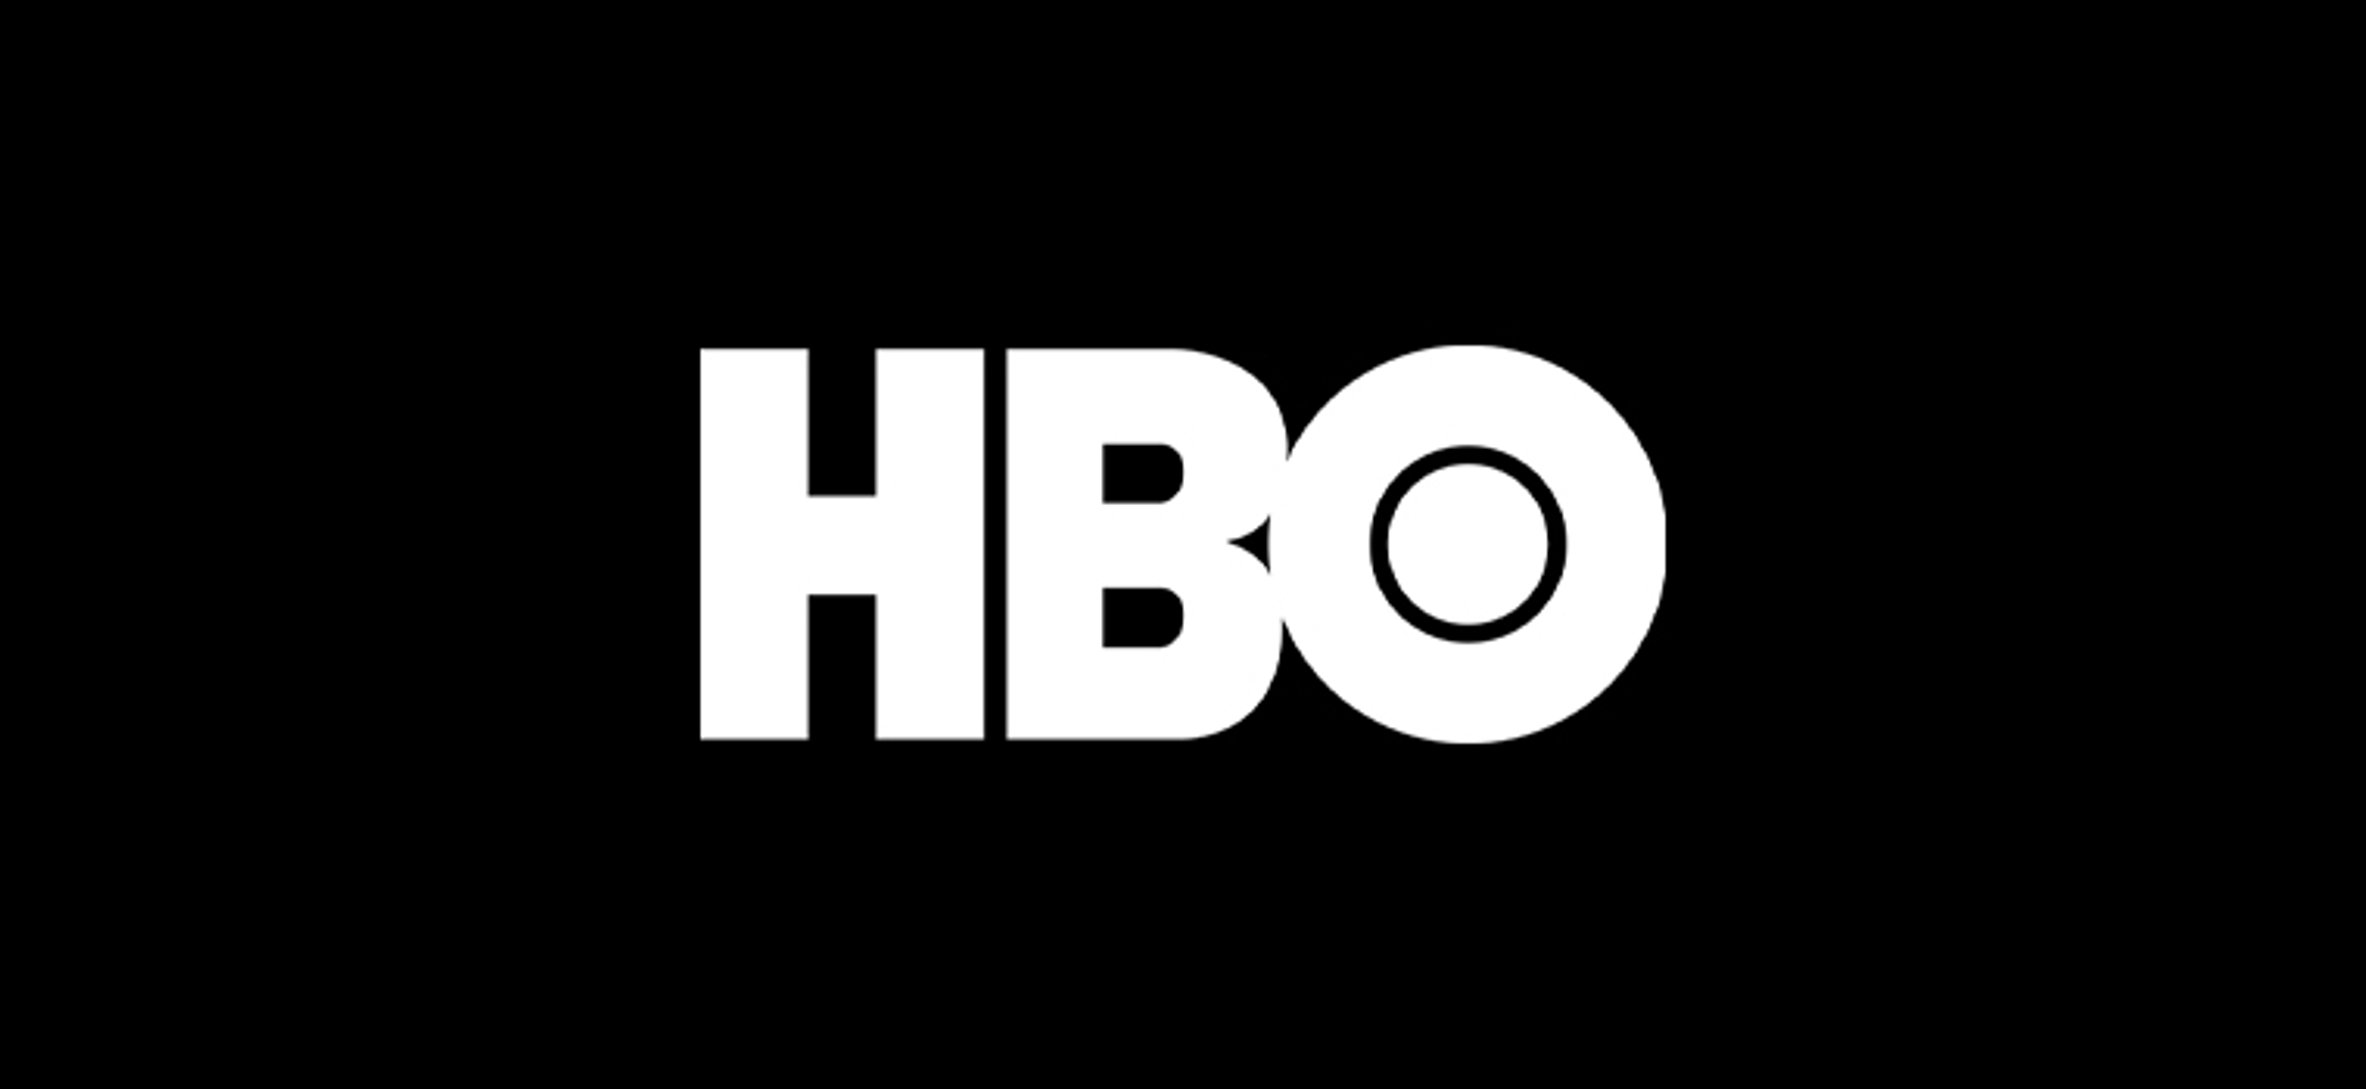 New HBO’s Lovecraft Country Produced by Jordan Peele Is Seeking Male Drivers!